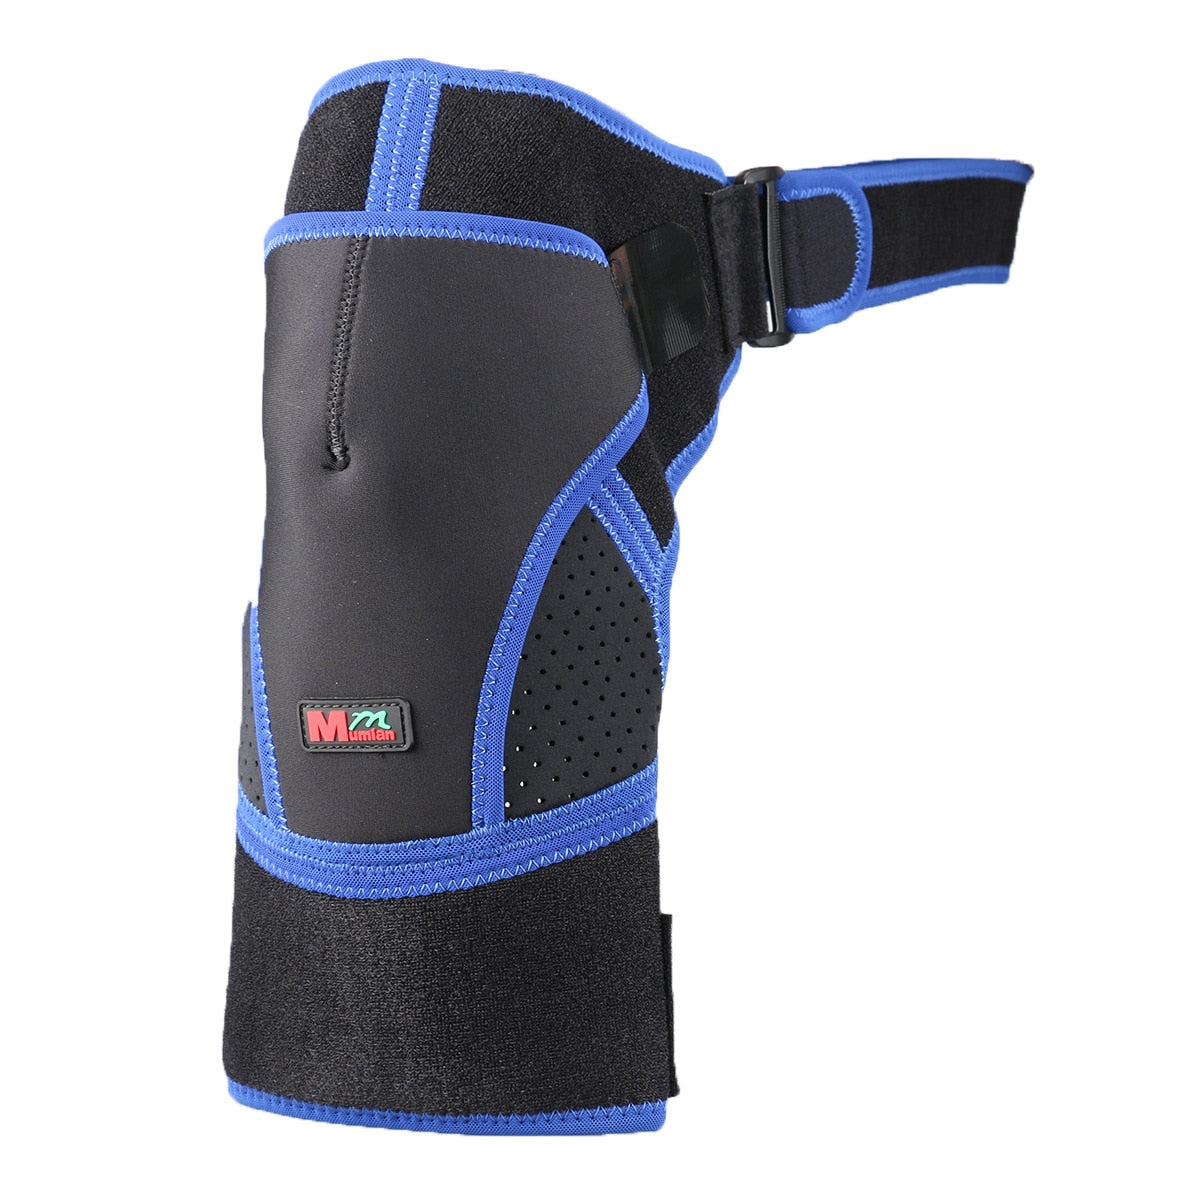 Shoulder Support with Back Brace | Shoulder injury recovery